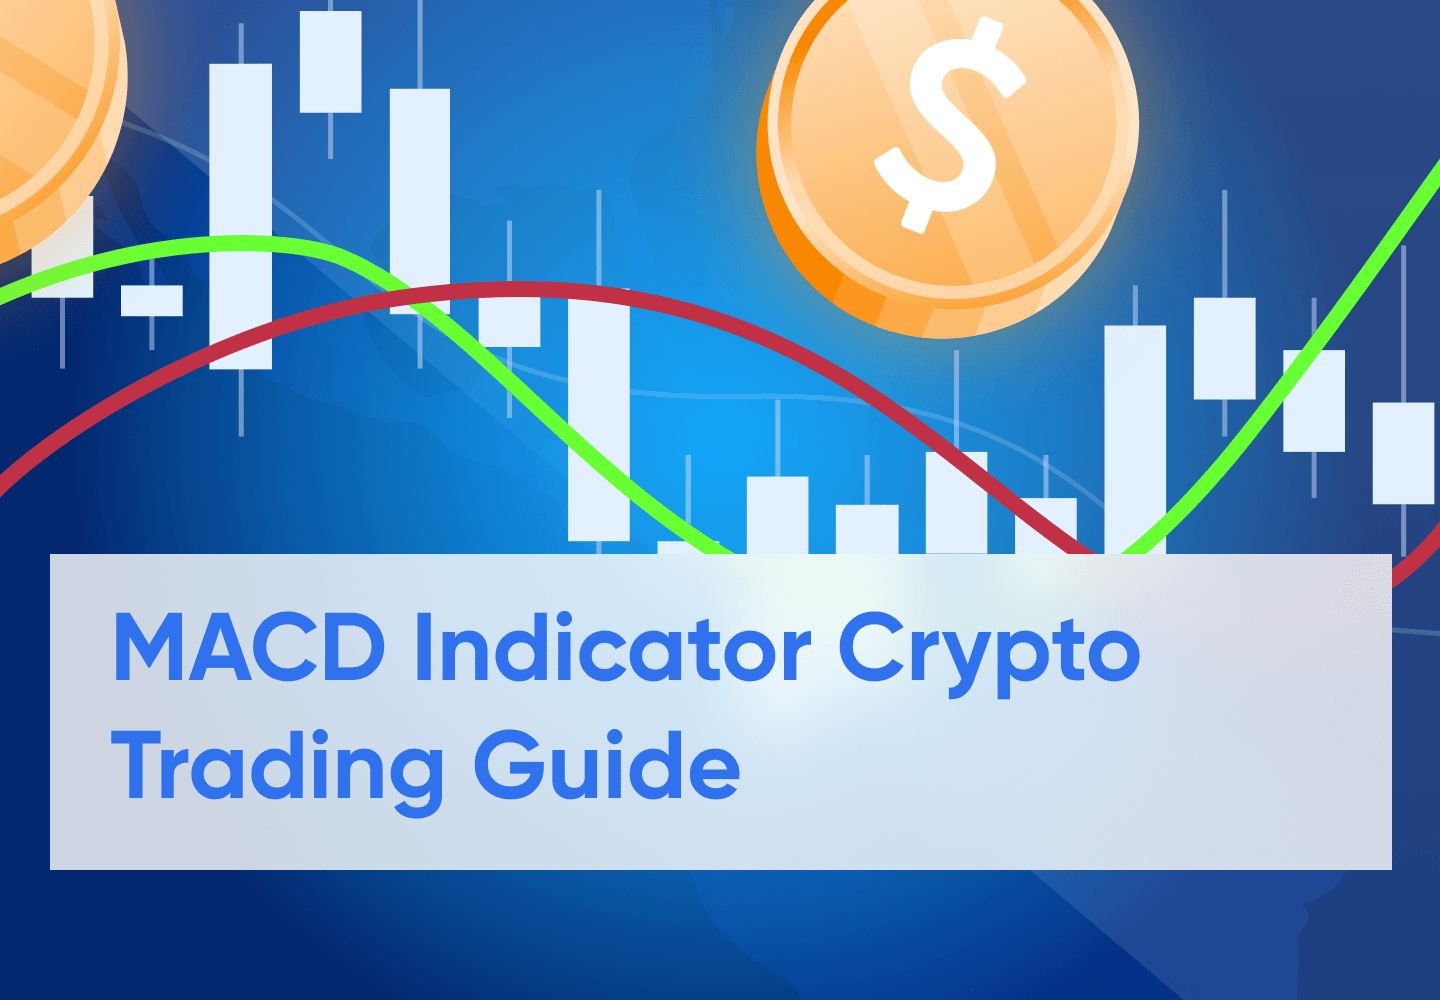 What Is The MACD Indicator In Crypto Trading?